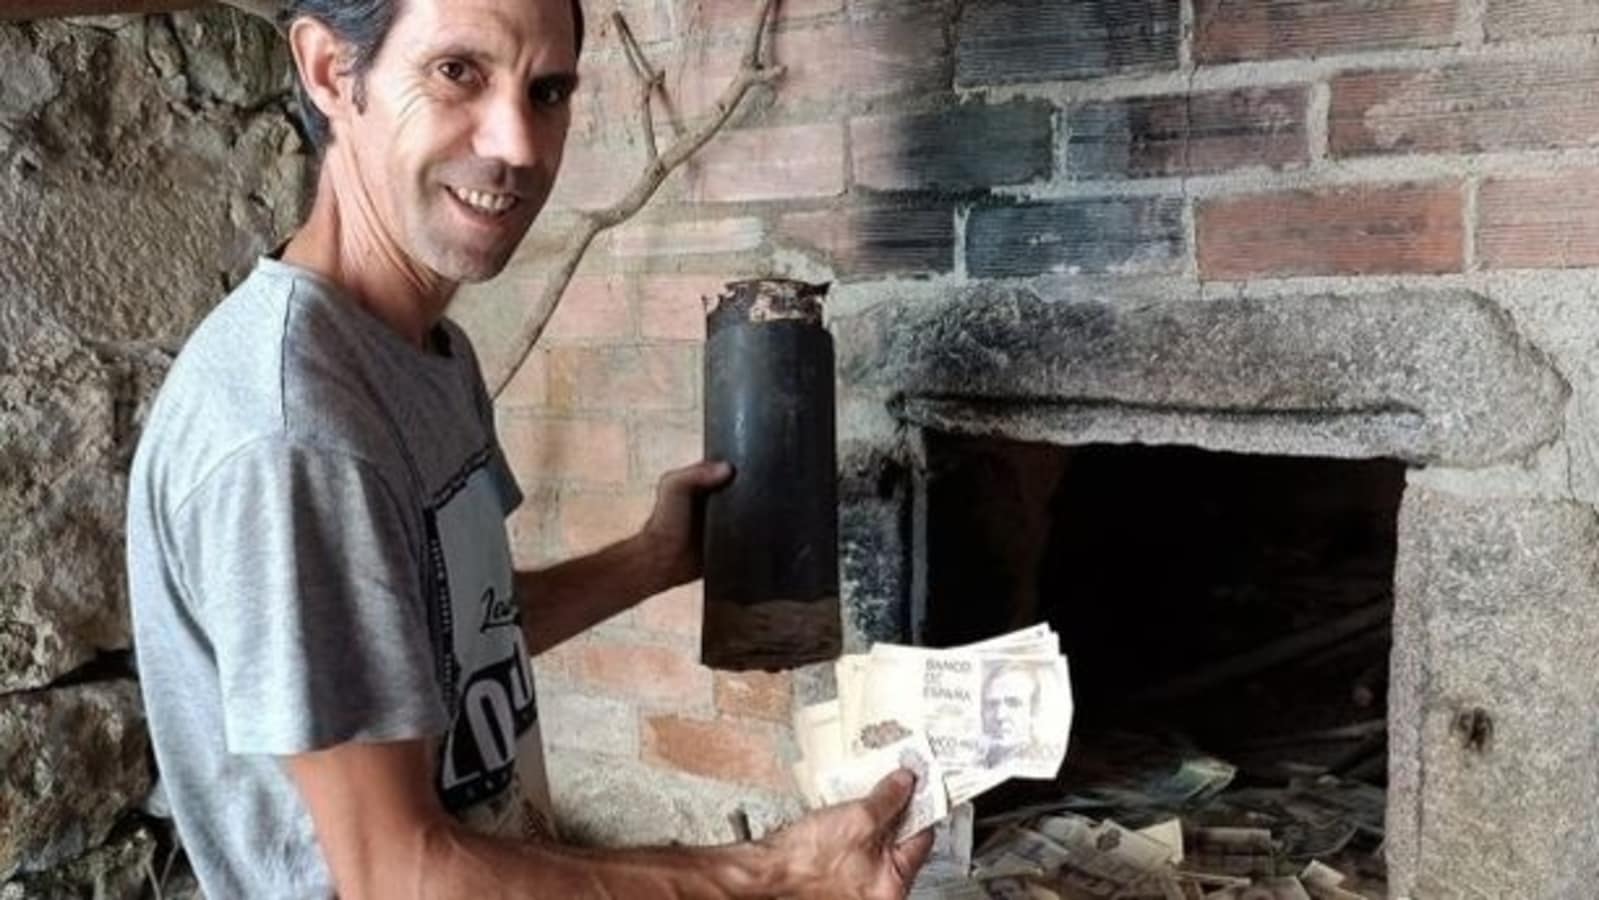 Money haul: Spanish man finds notes worth  ₹46 lakh hidden in walls, but gets to keep only...